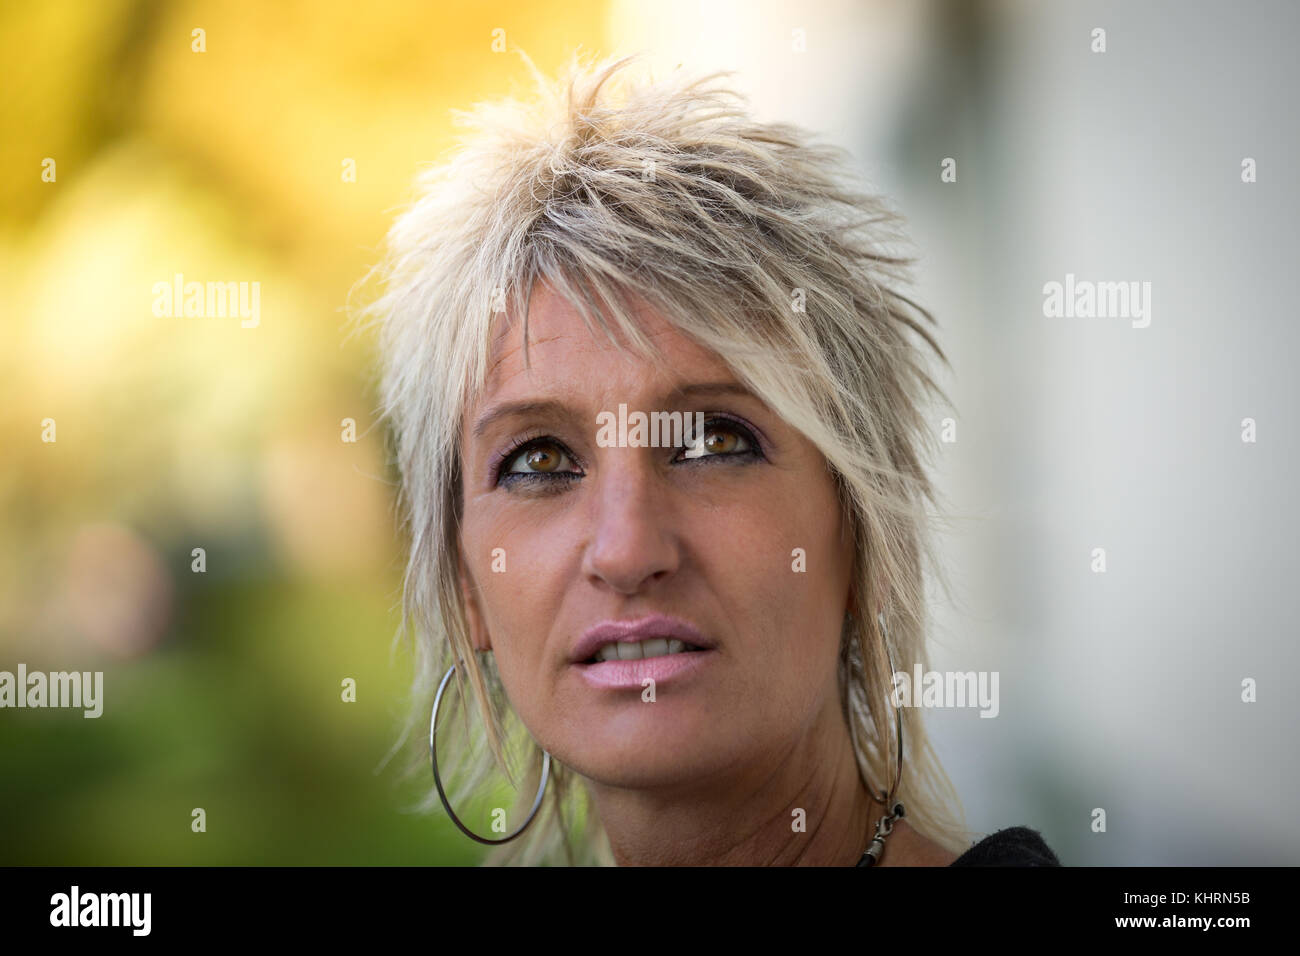 Woman with blond hair, between 45 - 50 years is looking slightly across the camera. Stock Photo